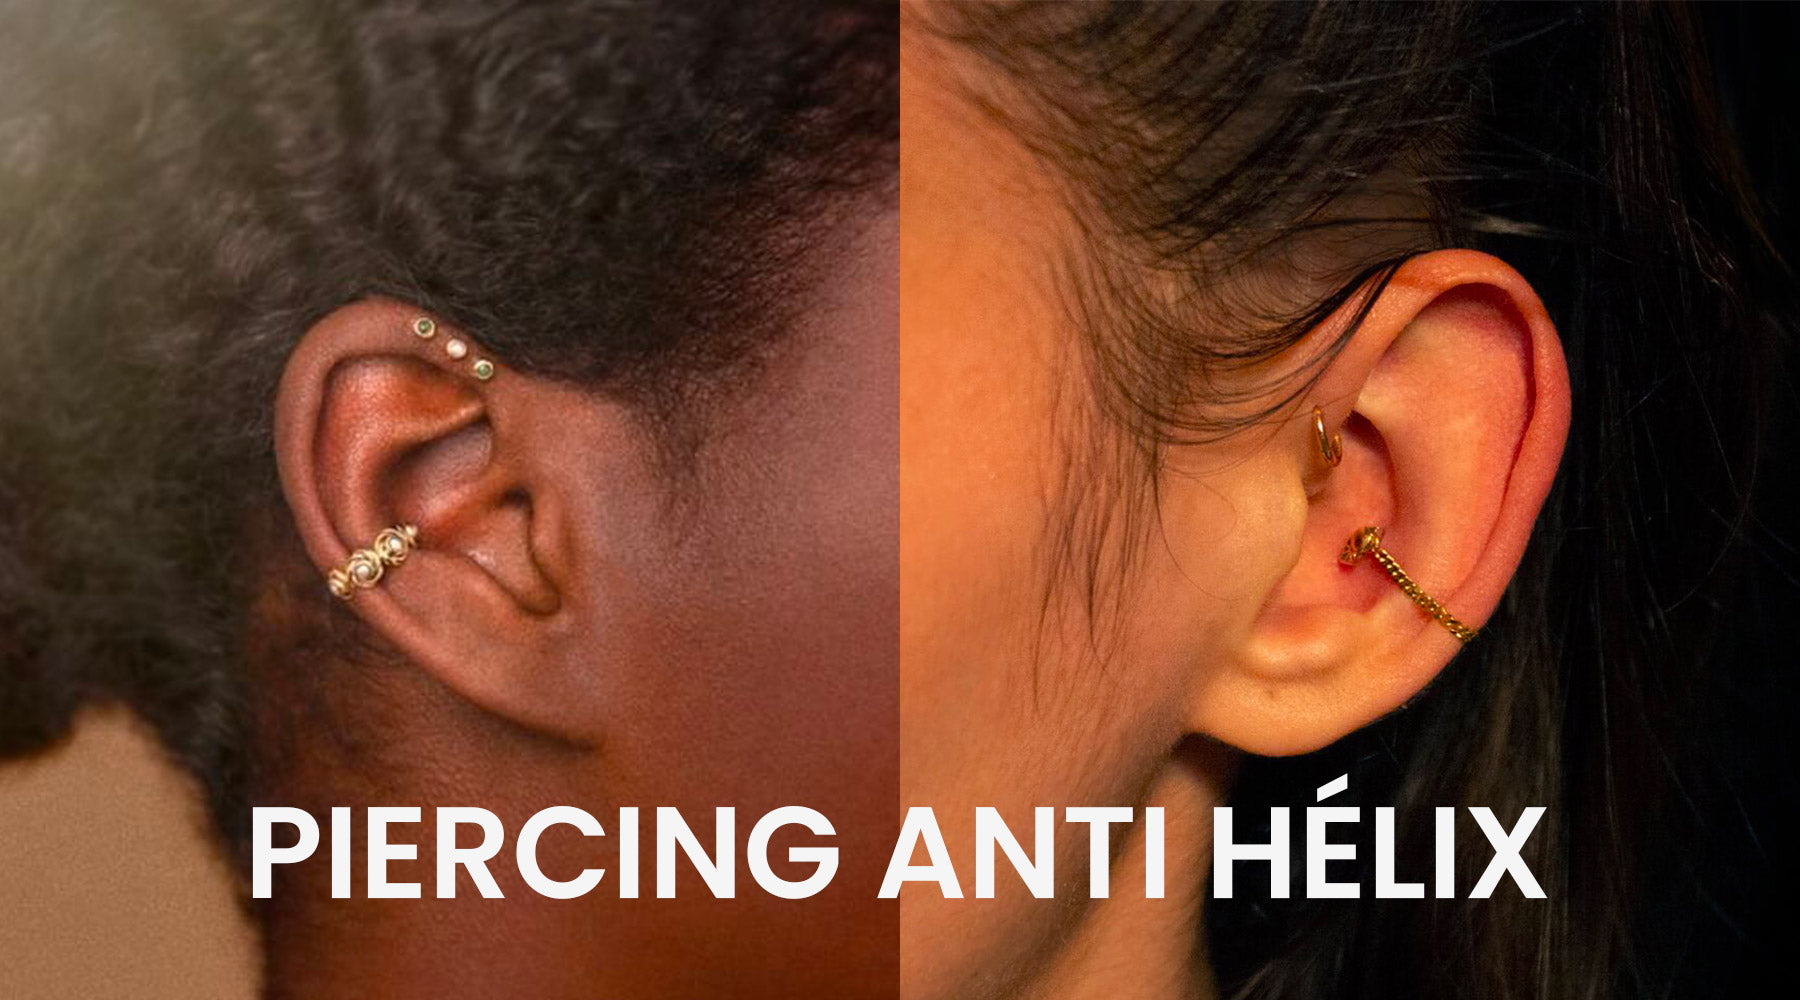 forward helix, conch and helix piercing | Helix piercing ring, Forward helix  piercing, Front helix piercing